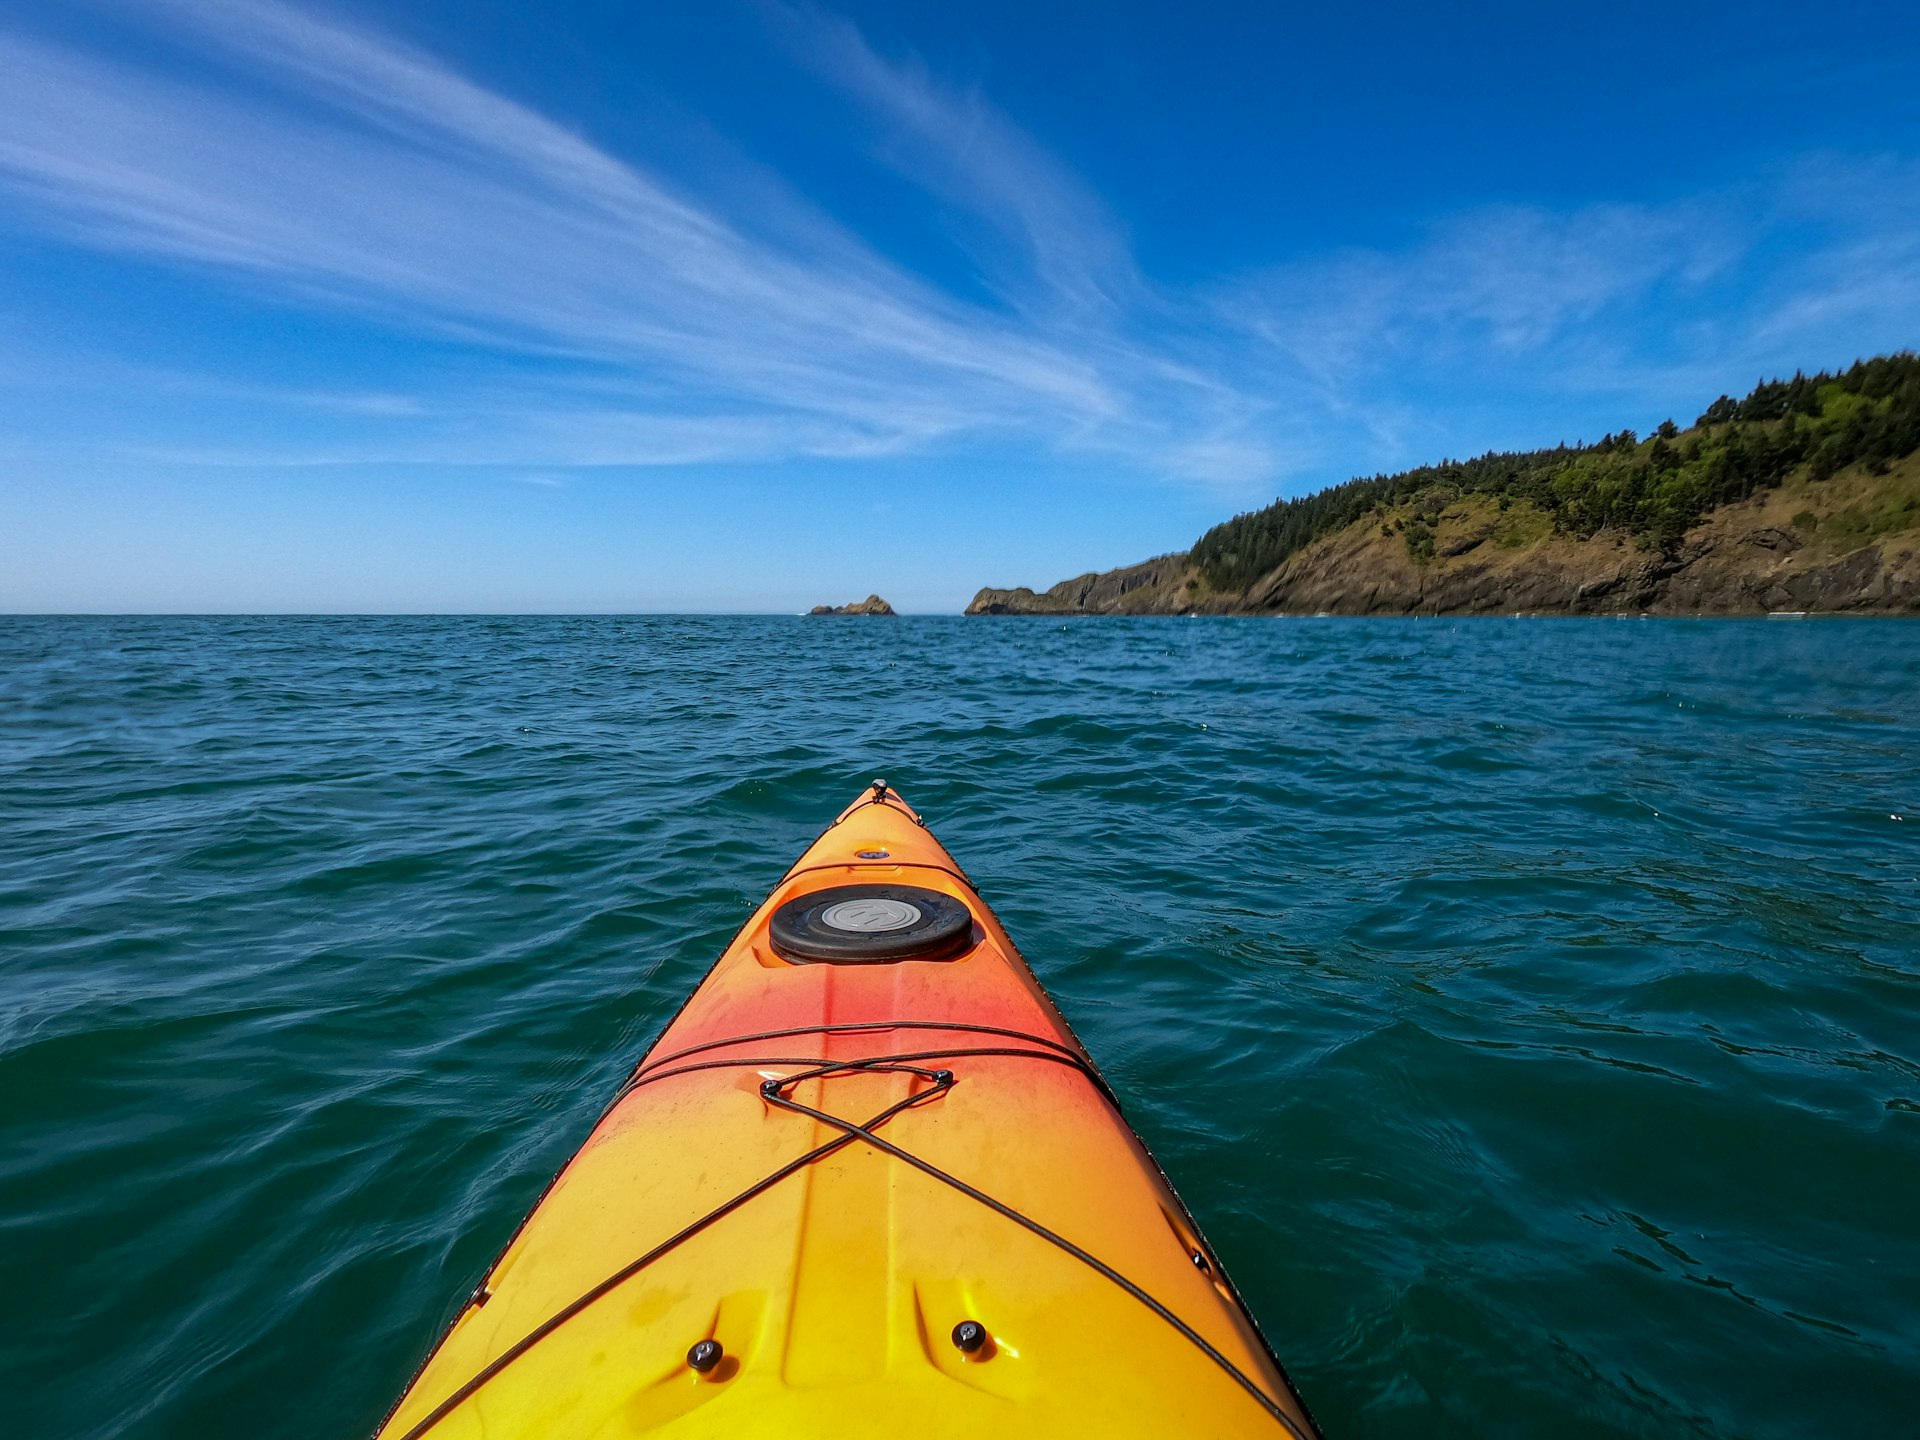 The front of a yellow-and-orange kayak in deep blue waters with the coastline ahead